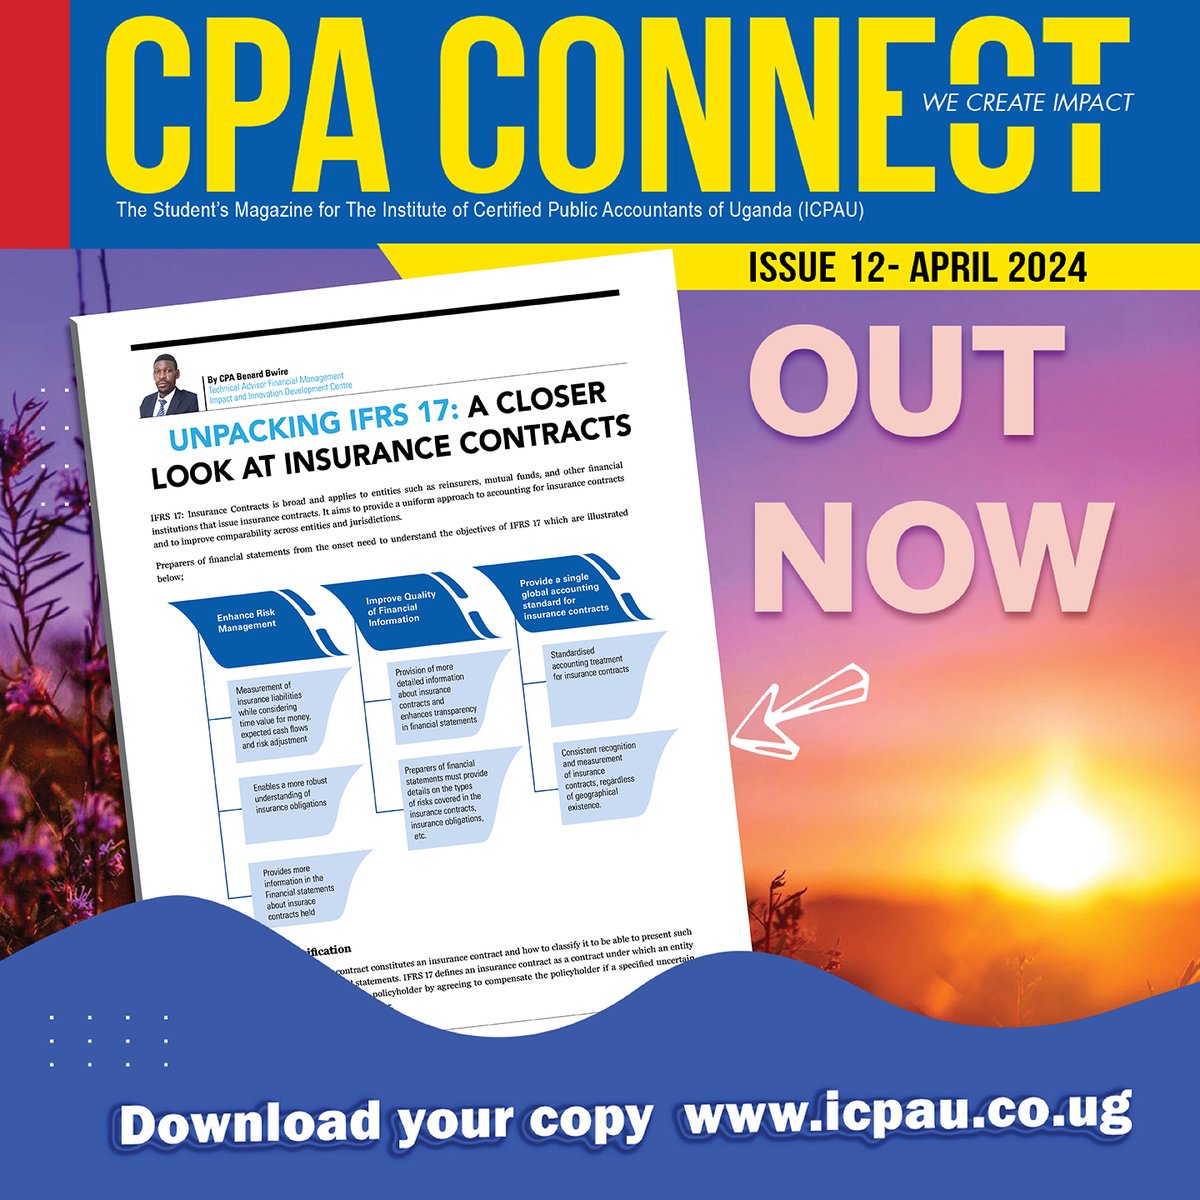 CPA Benard Bwire breaks down IFRS 17 in the 12th Issue of CPA Connect Magazine.

Stay updated and download your copy now via bit.ly/CPAConnect12_

#CPAConnect
#WeCreateImpact